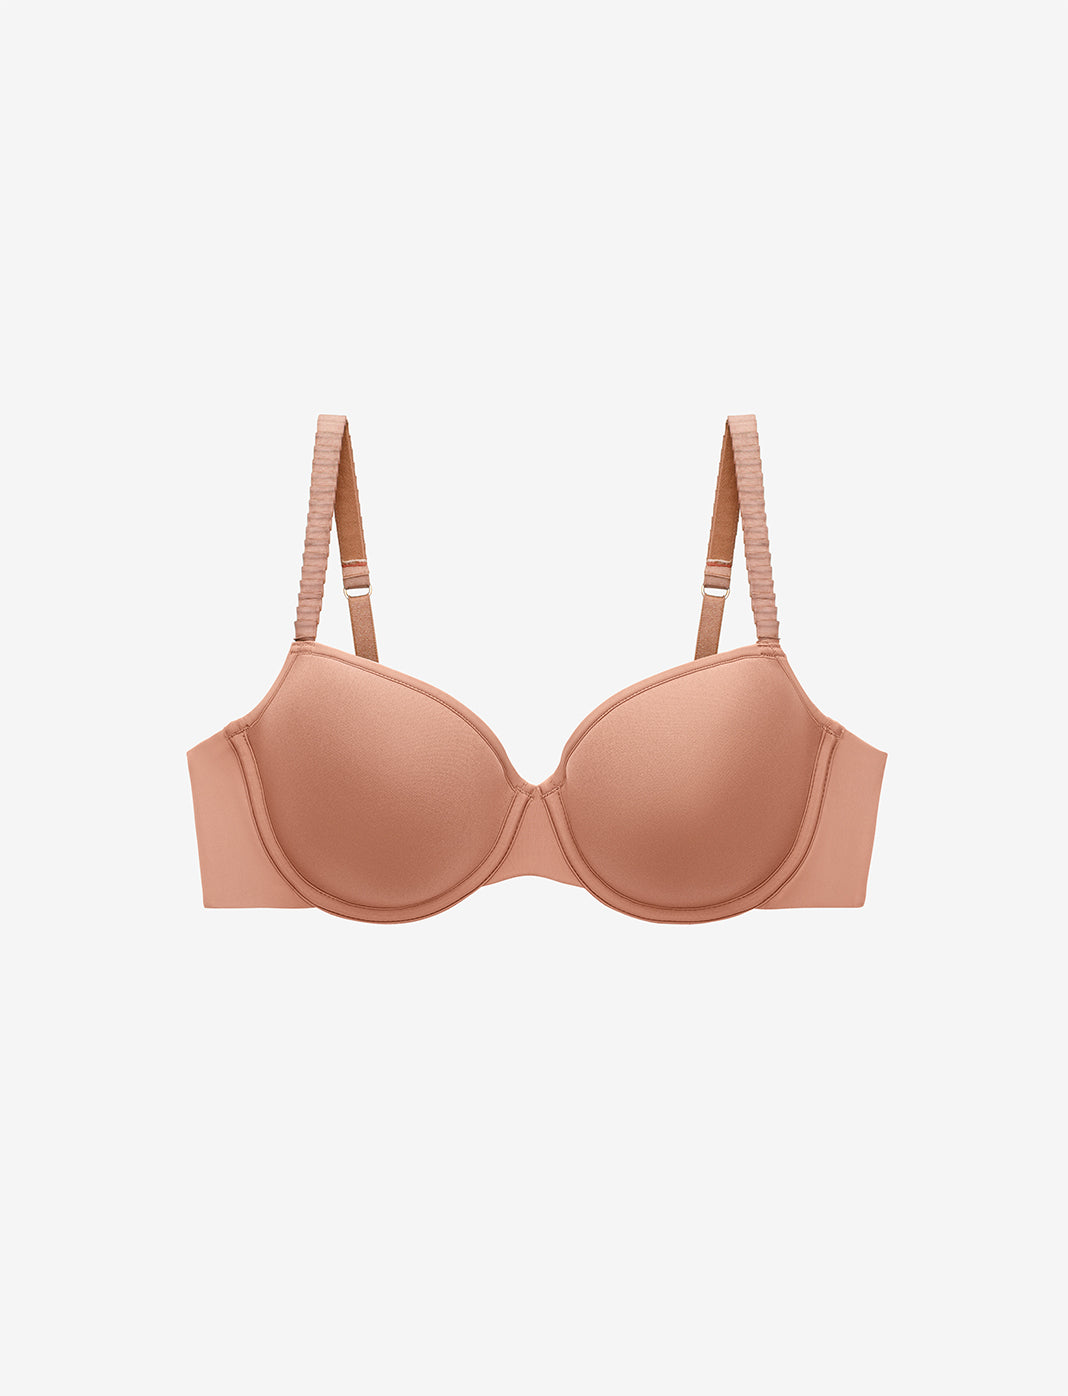 Best T-Shirt Bras from ThirdLove - Shop Comfortable & Best Fitting